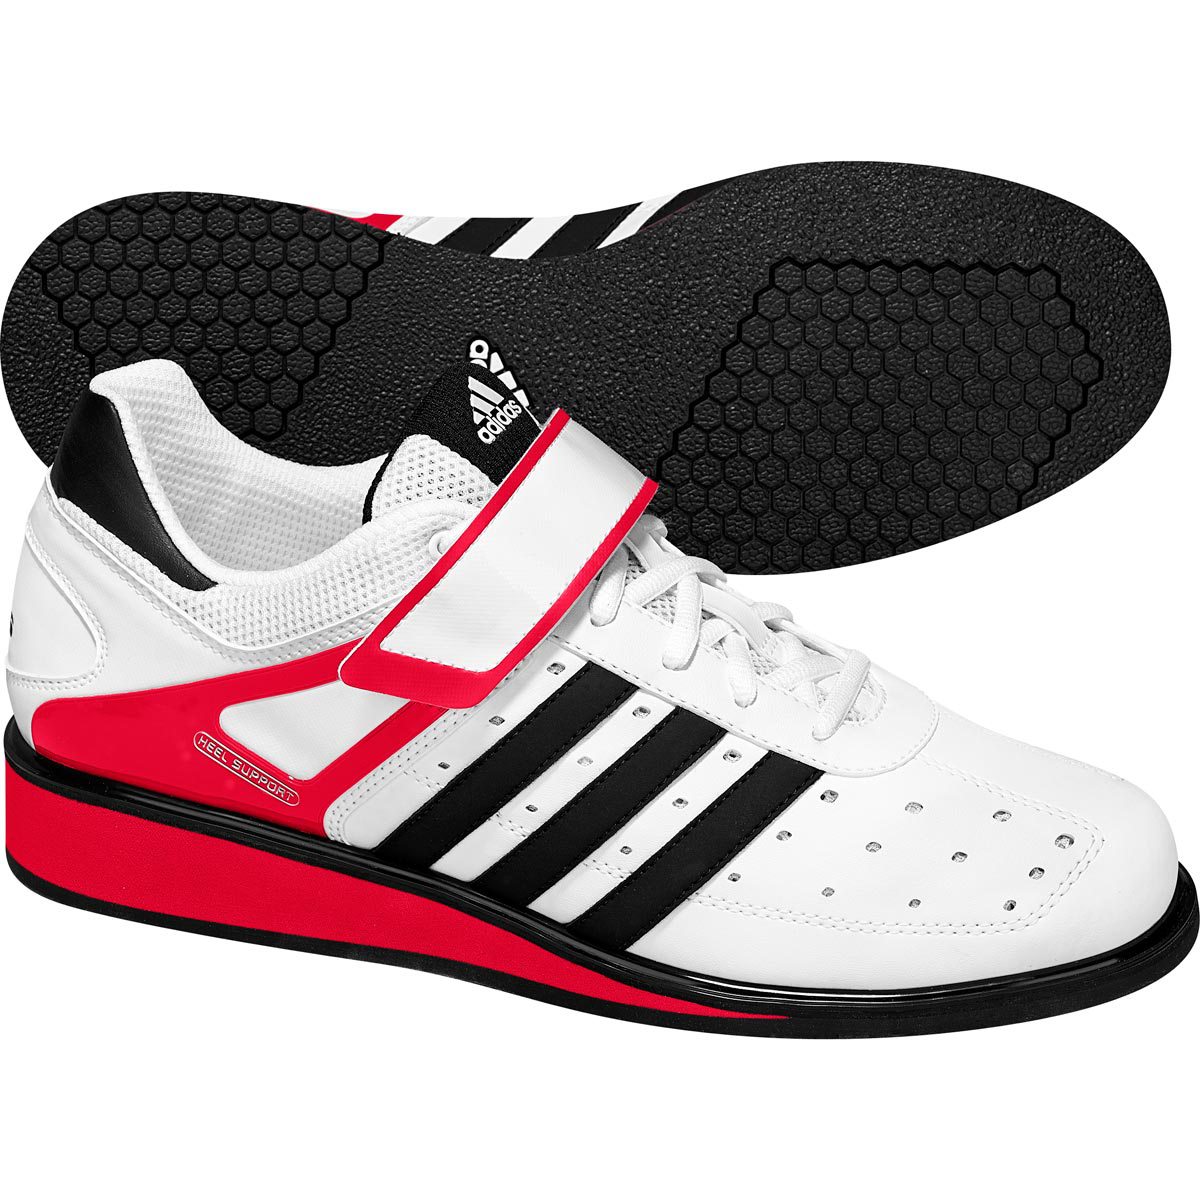 Weightlifting and powerlifting shoe Adidas Power Perfect